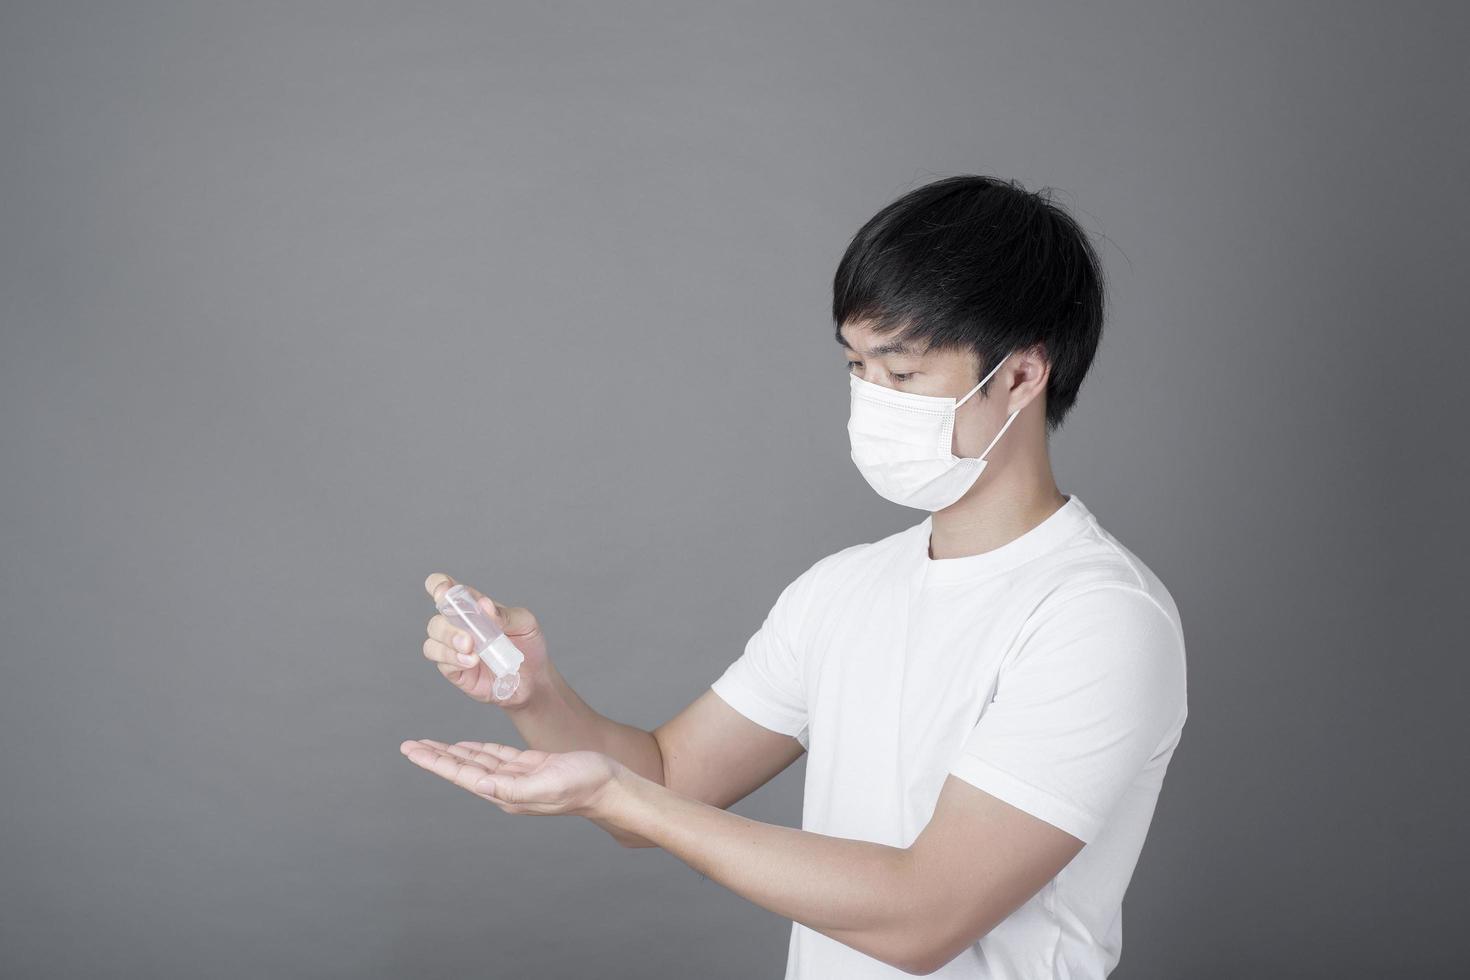 Portrait of Man sanitizing hands with alcohol gel, Health care concept photo